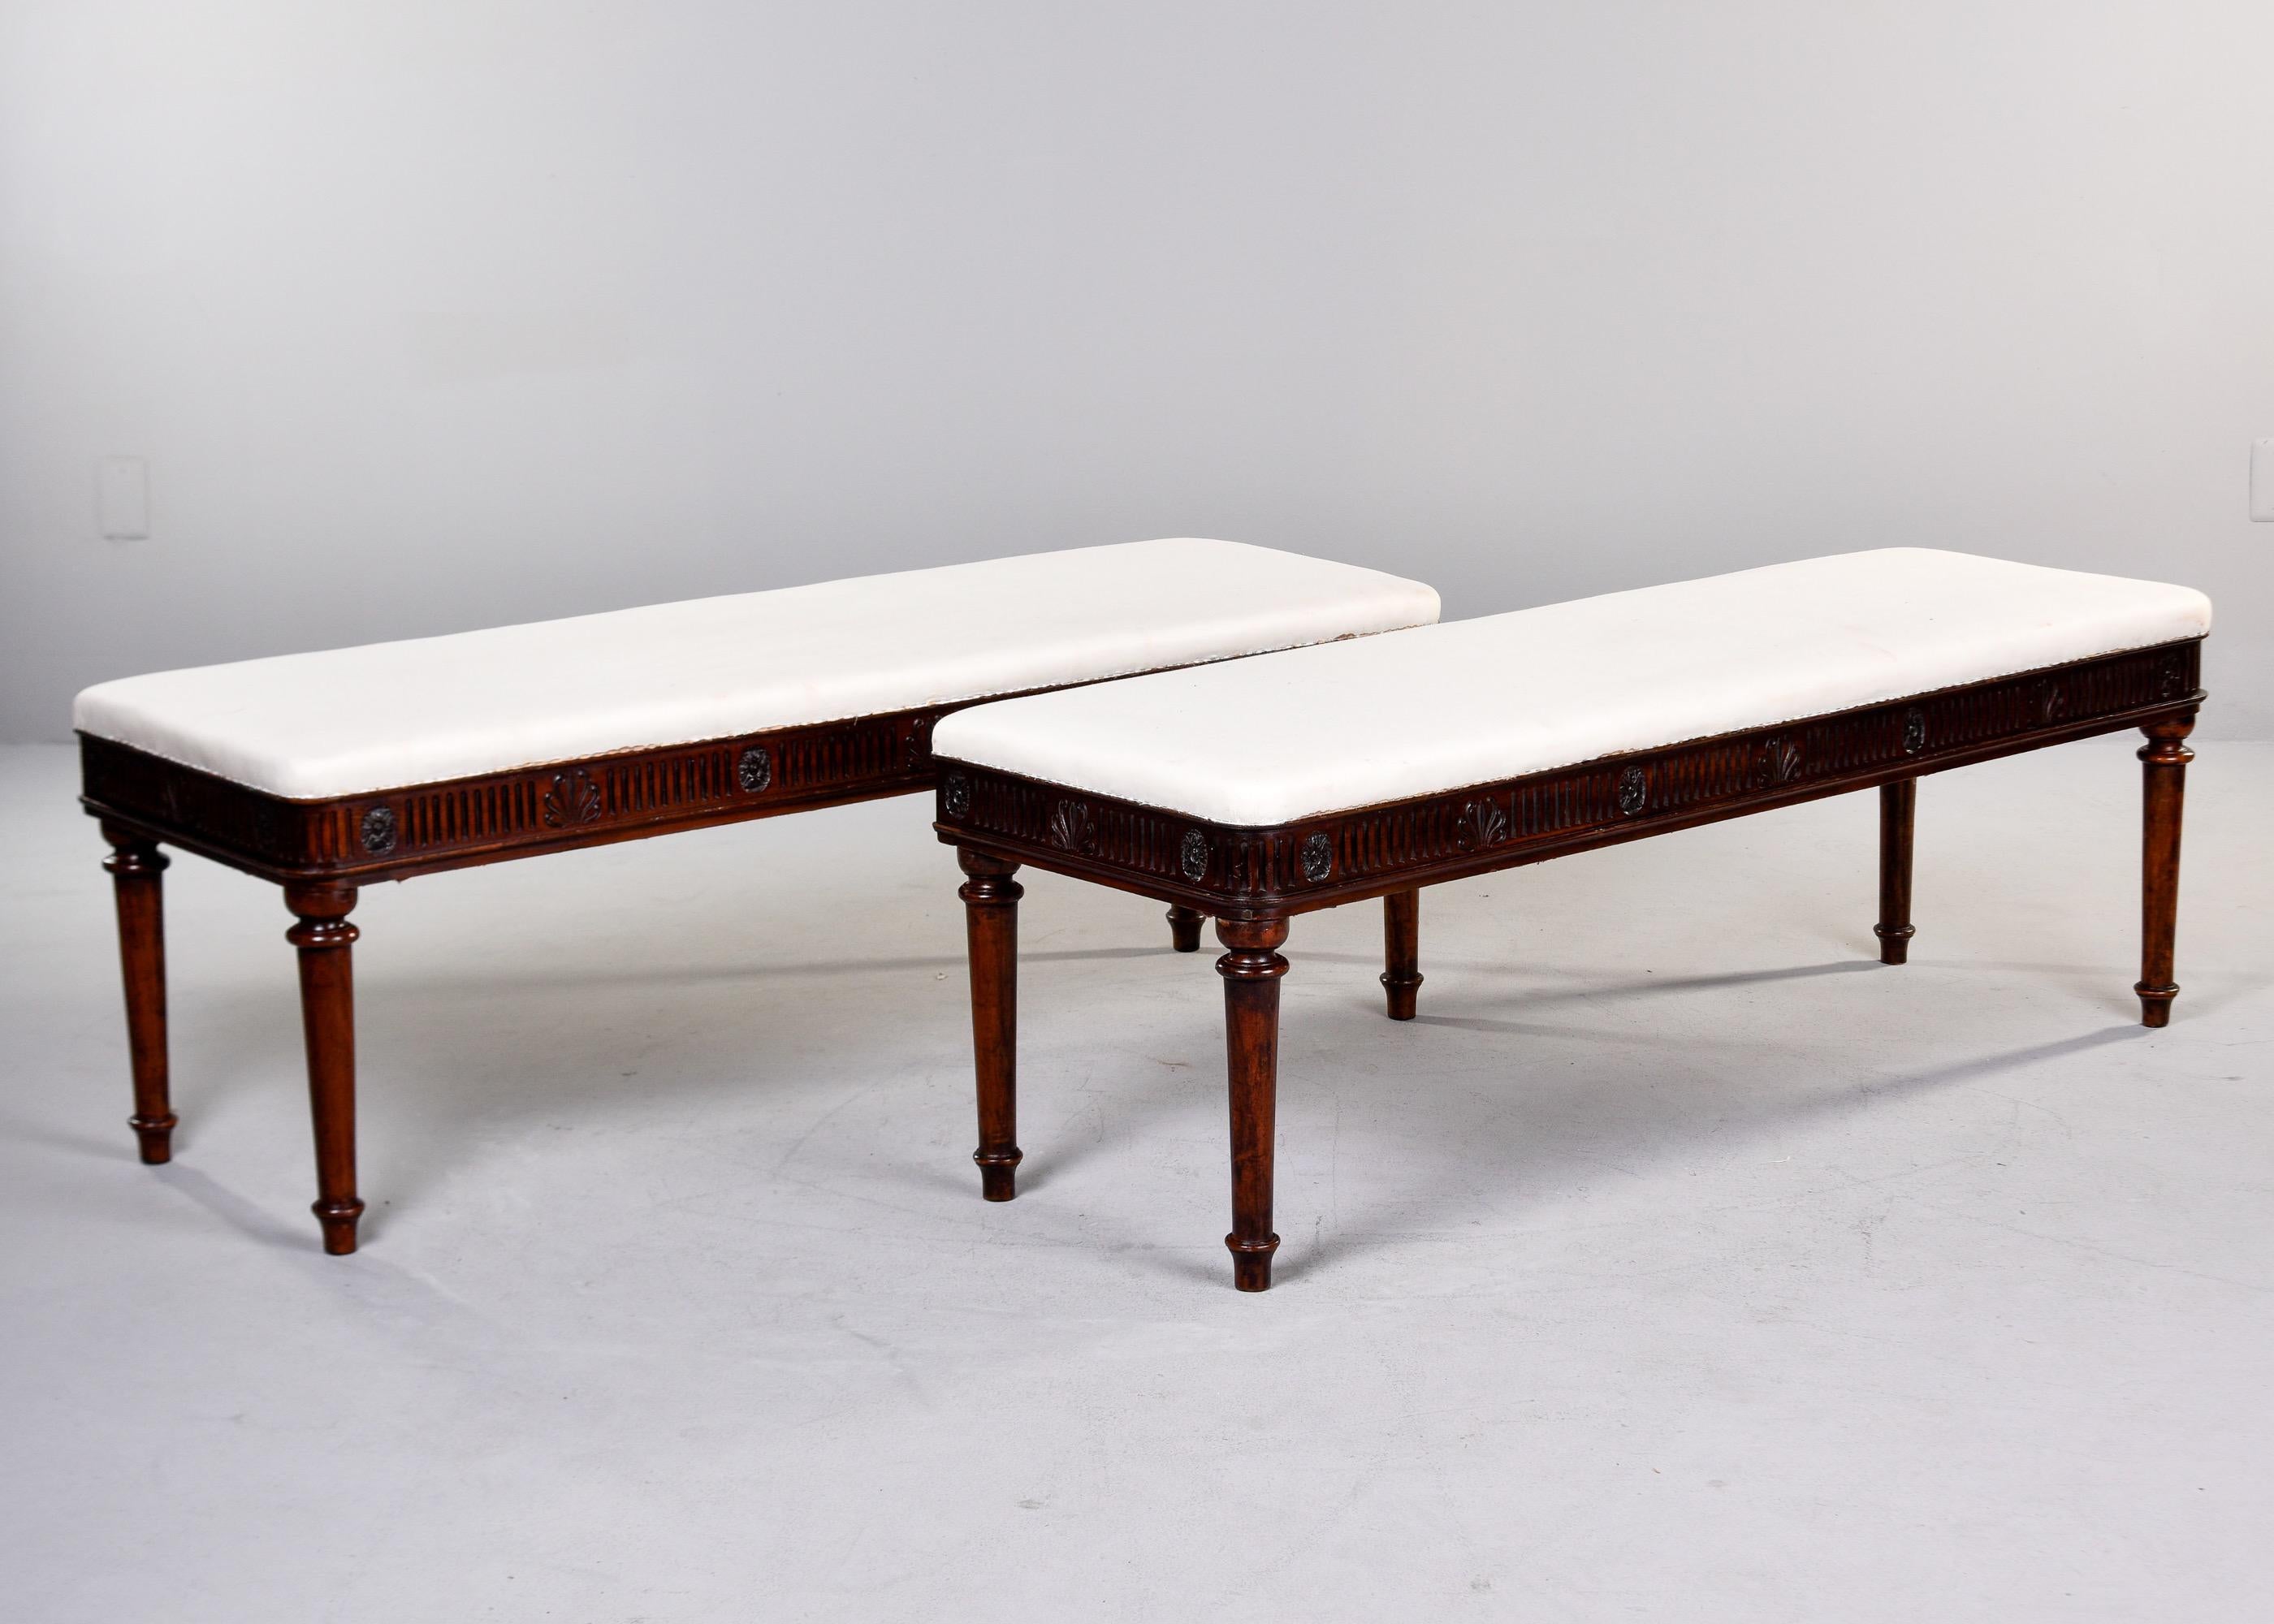 Mid 19th C English Upholstered Mahogany Window Seat with Reeded Detail   For Sale 6